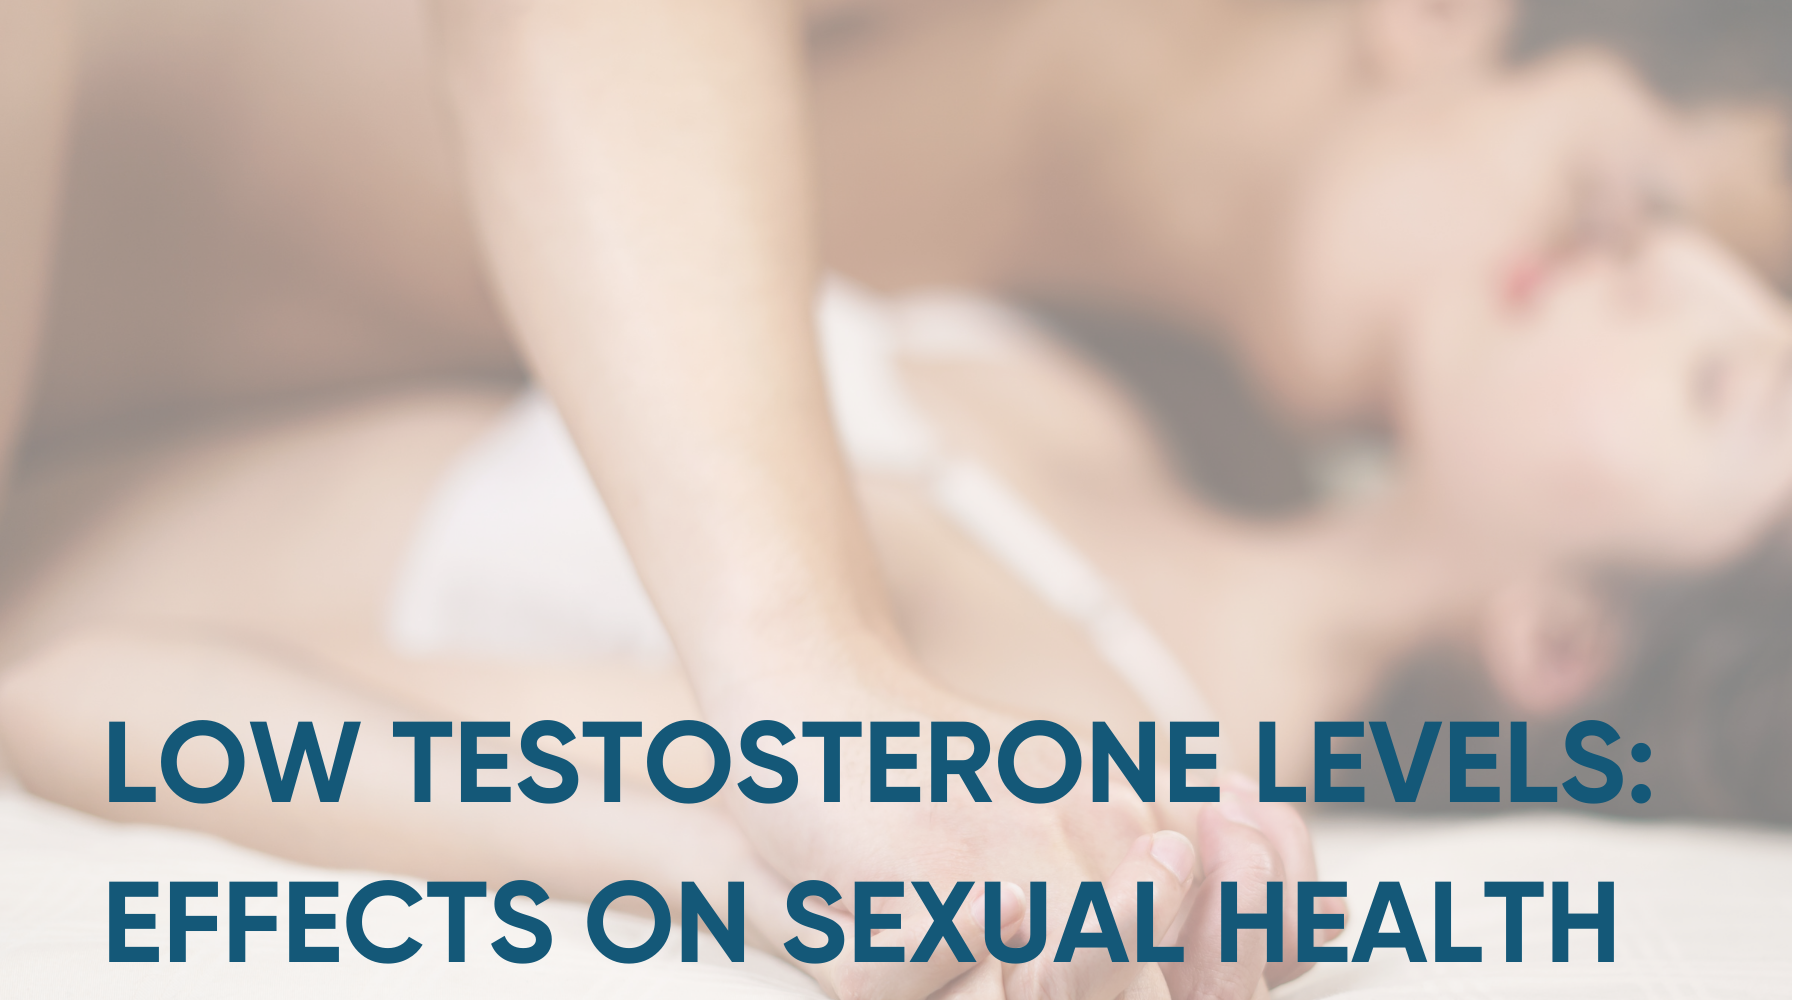 LOW TESTOSTERONE LEVELS EFFECTS ON SEXUAL HEALTH